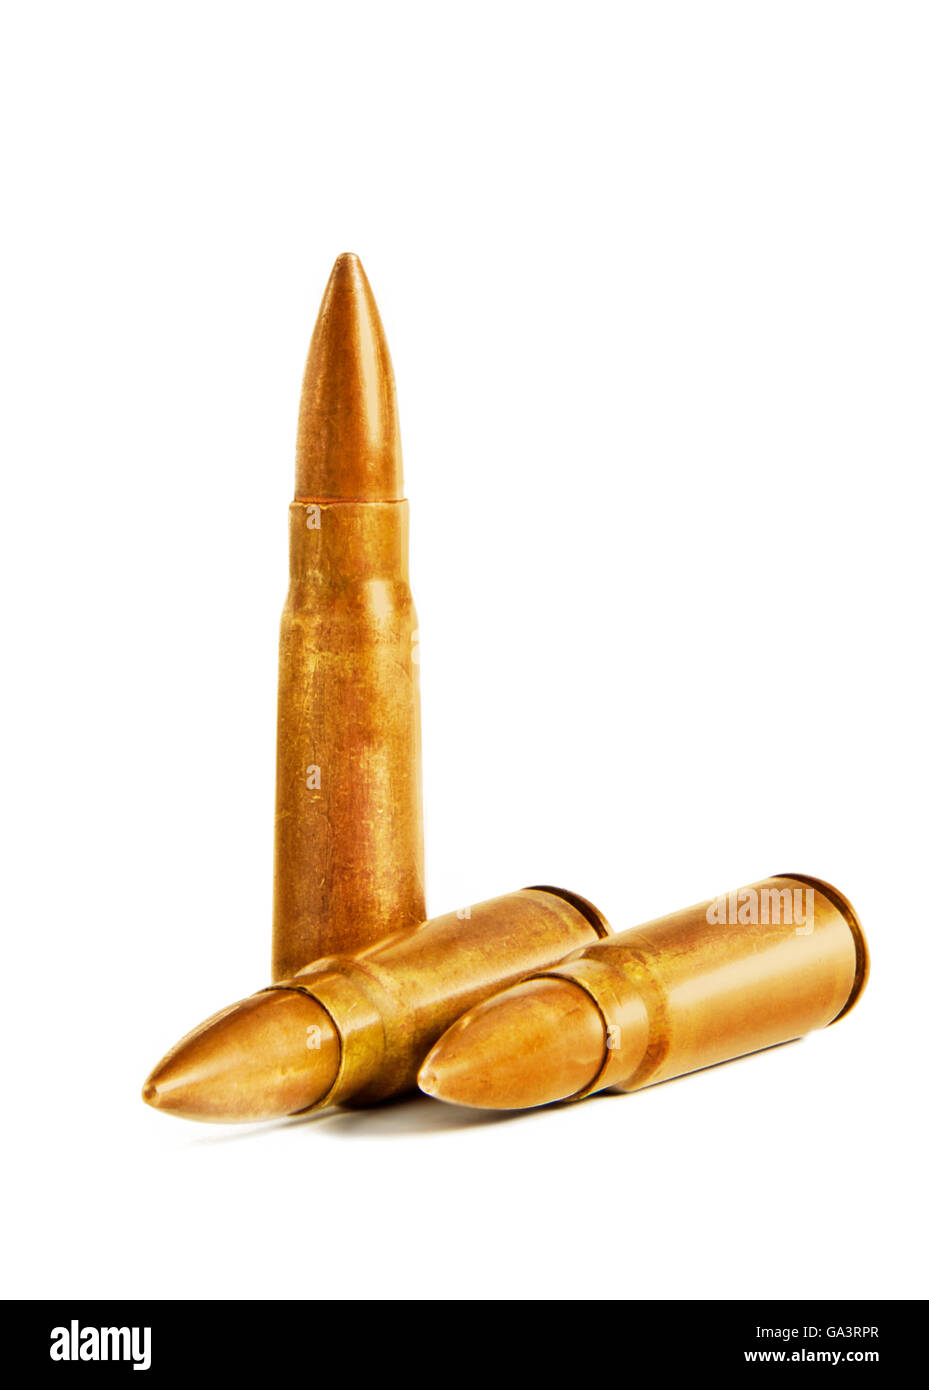 Three 7.62x39mm Old Assault Rifle Bullets Isolated on White Background Stock Photo